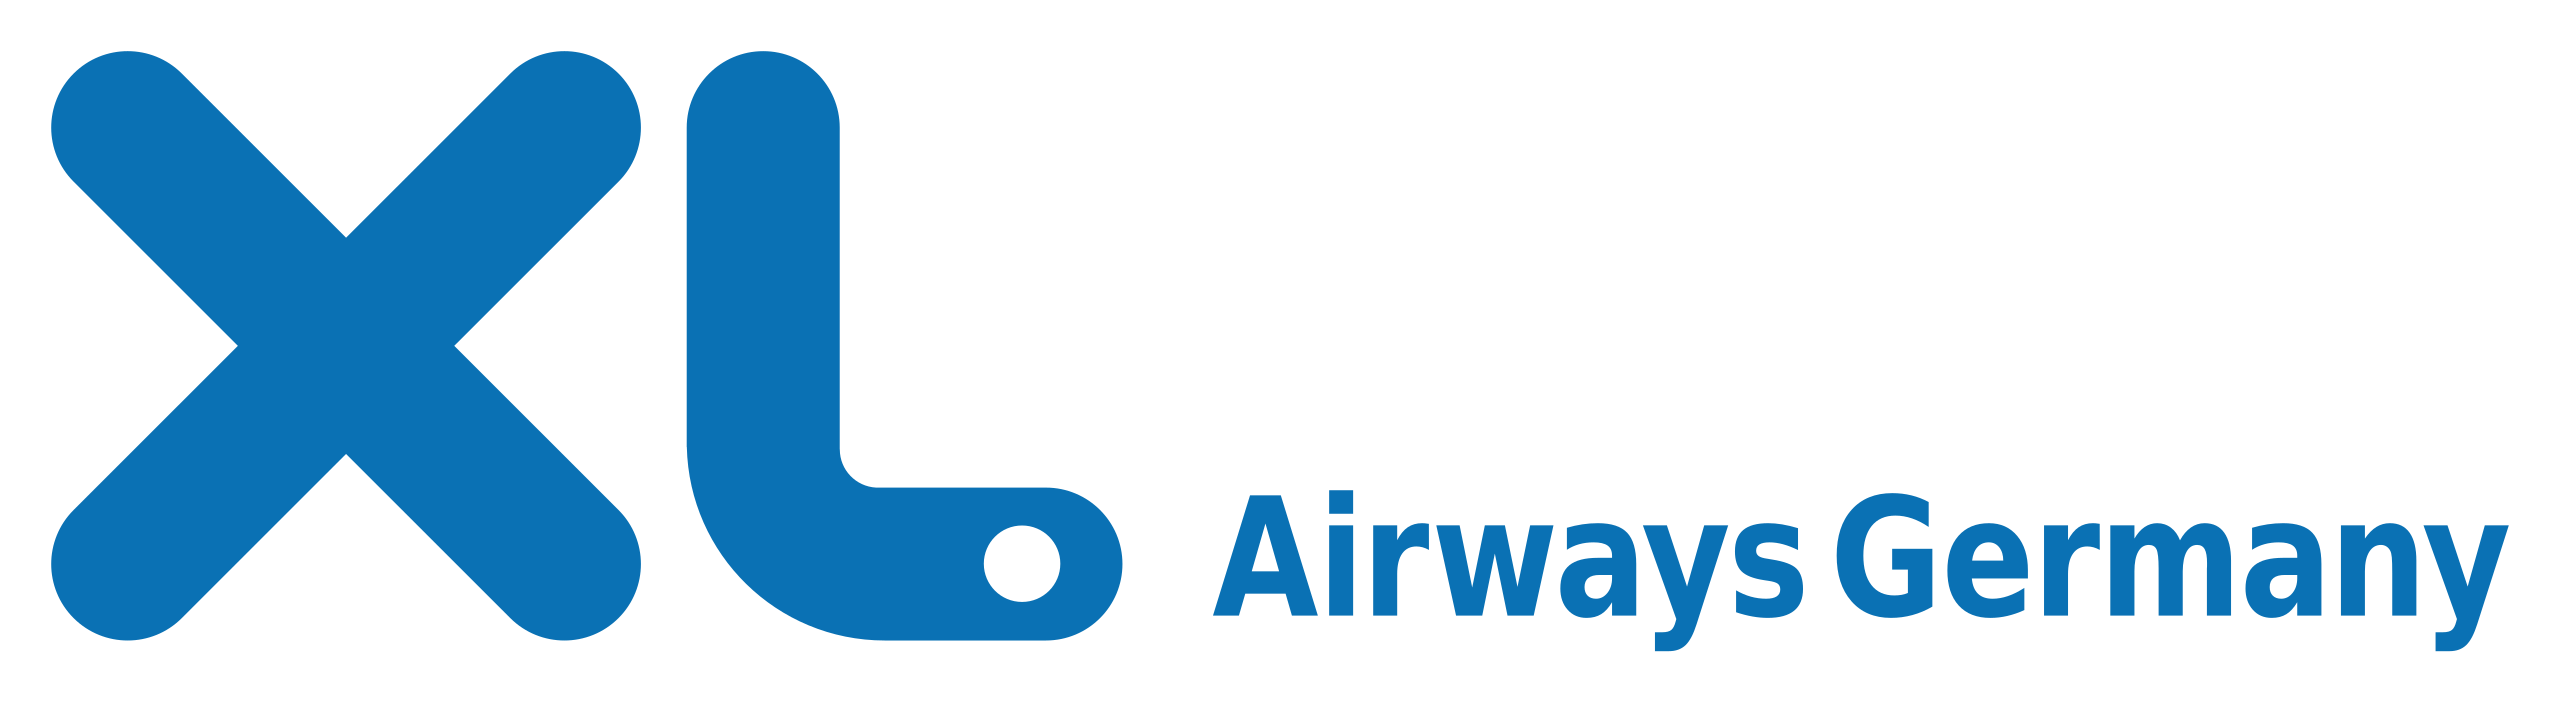 File:XL Airways France logo.svg - Wikimedia Commons